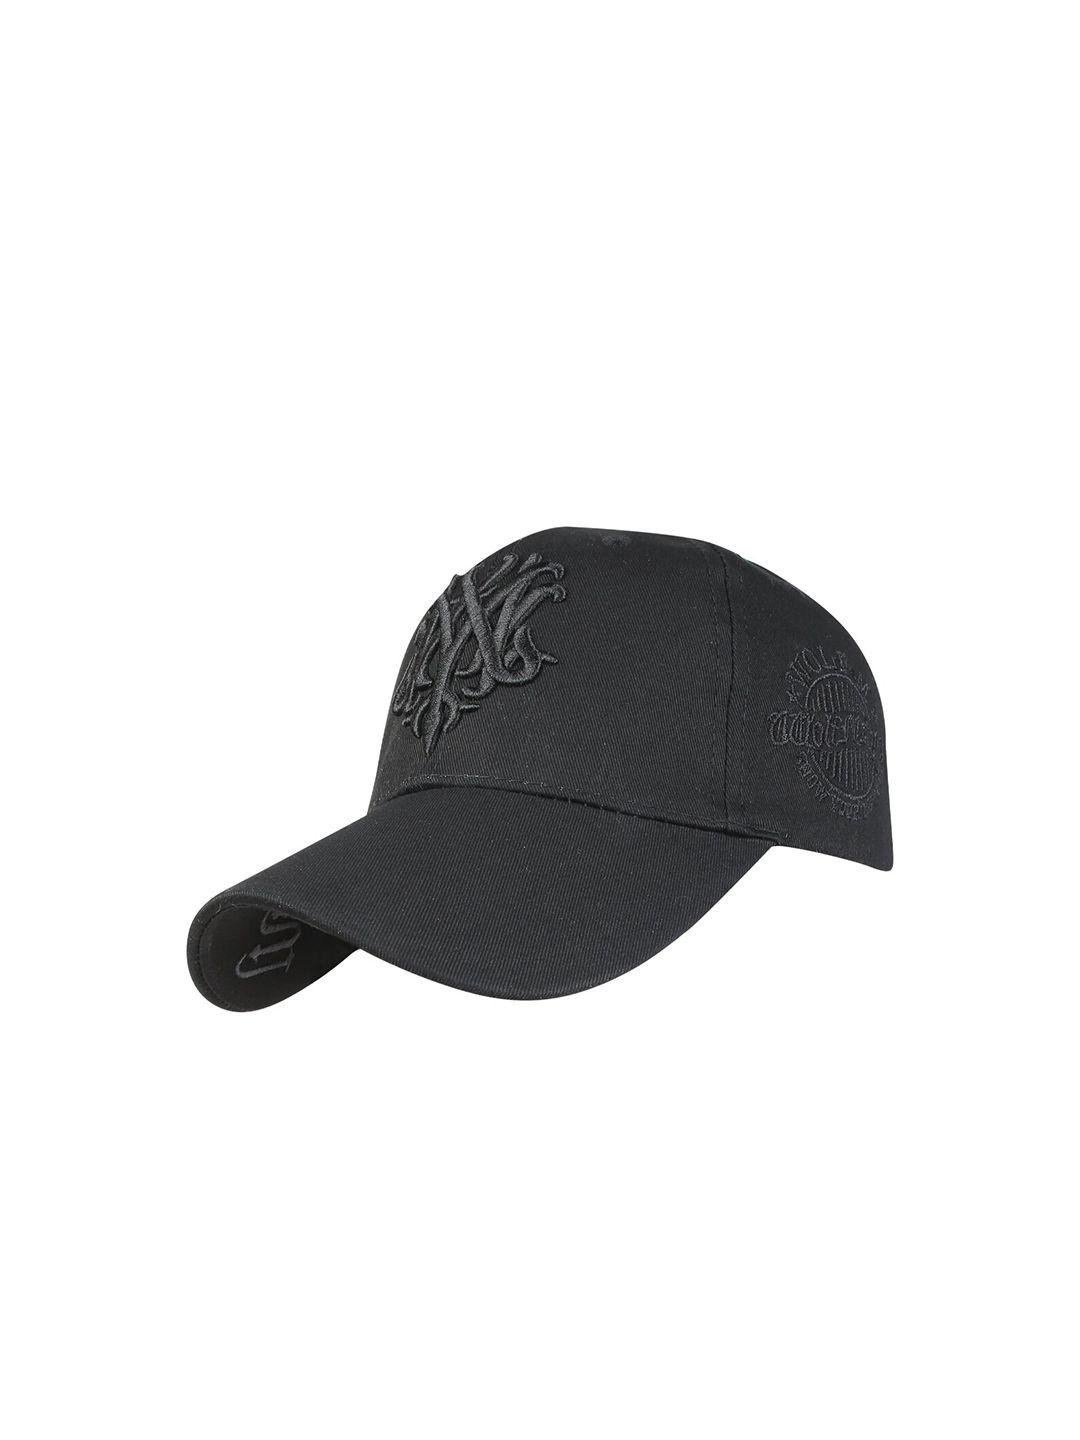 isweven embroidered cotton baseball cap